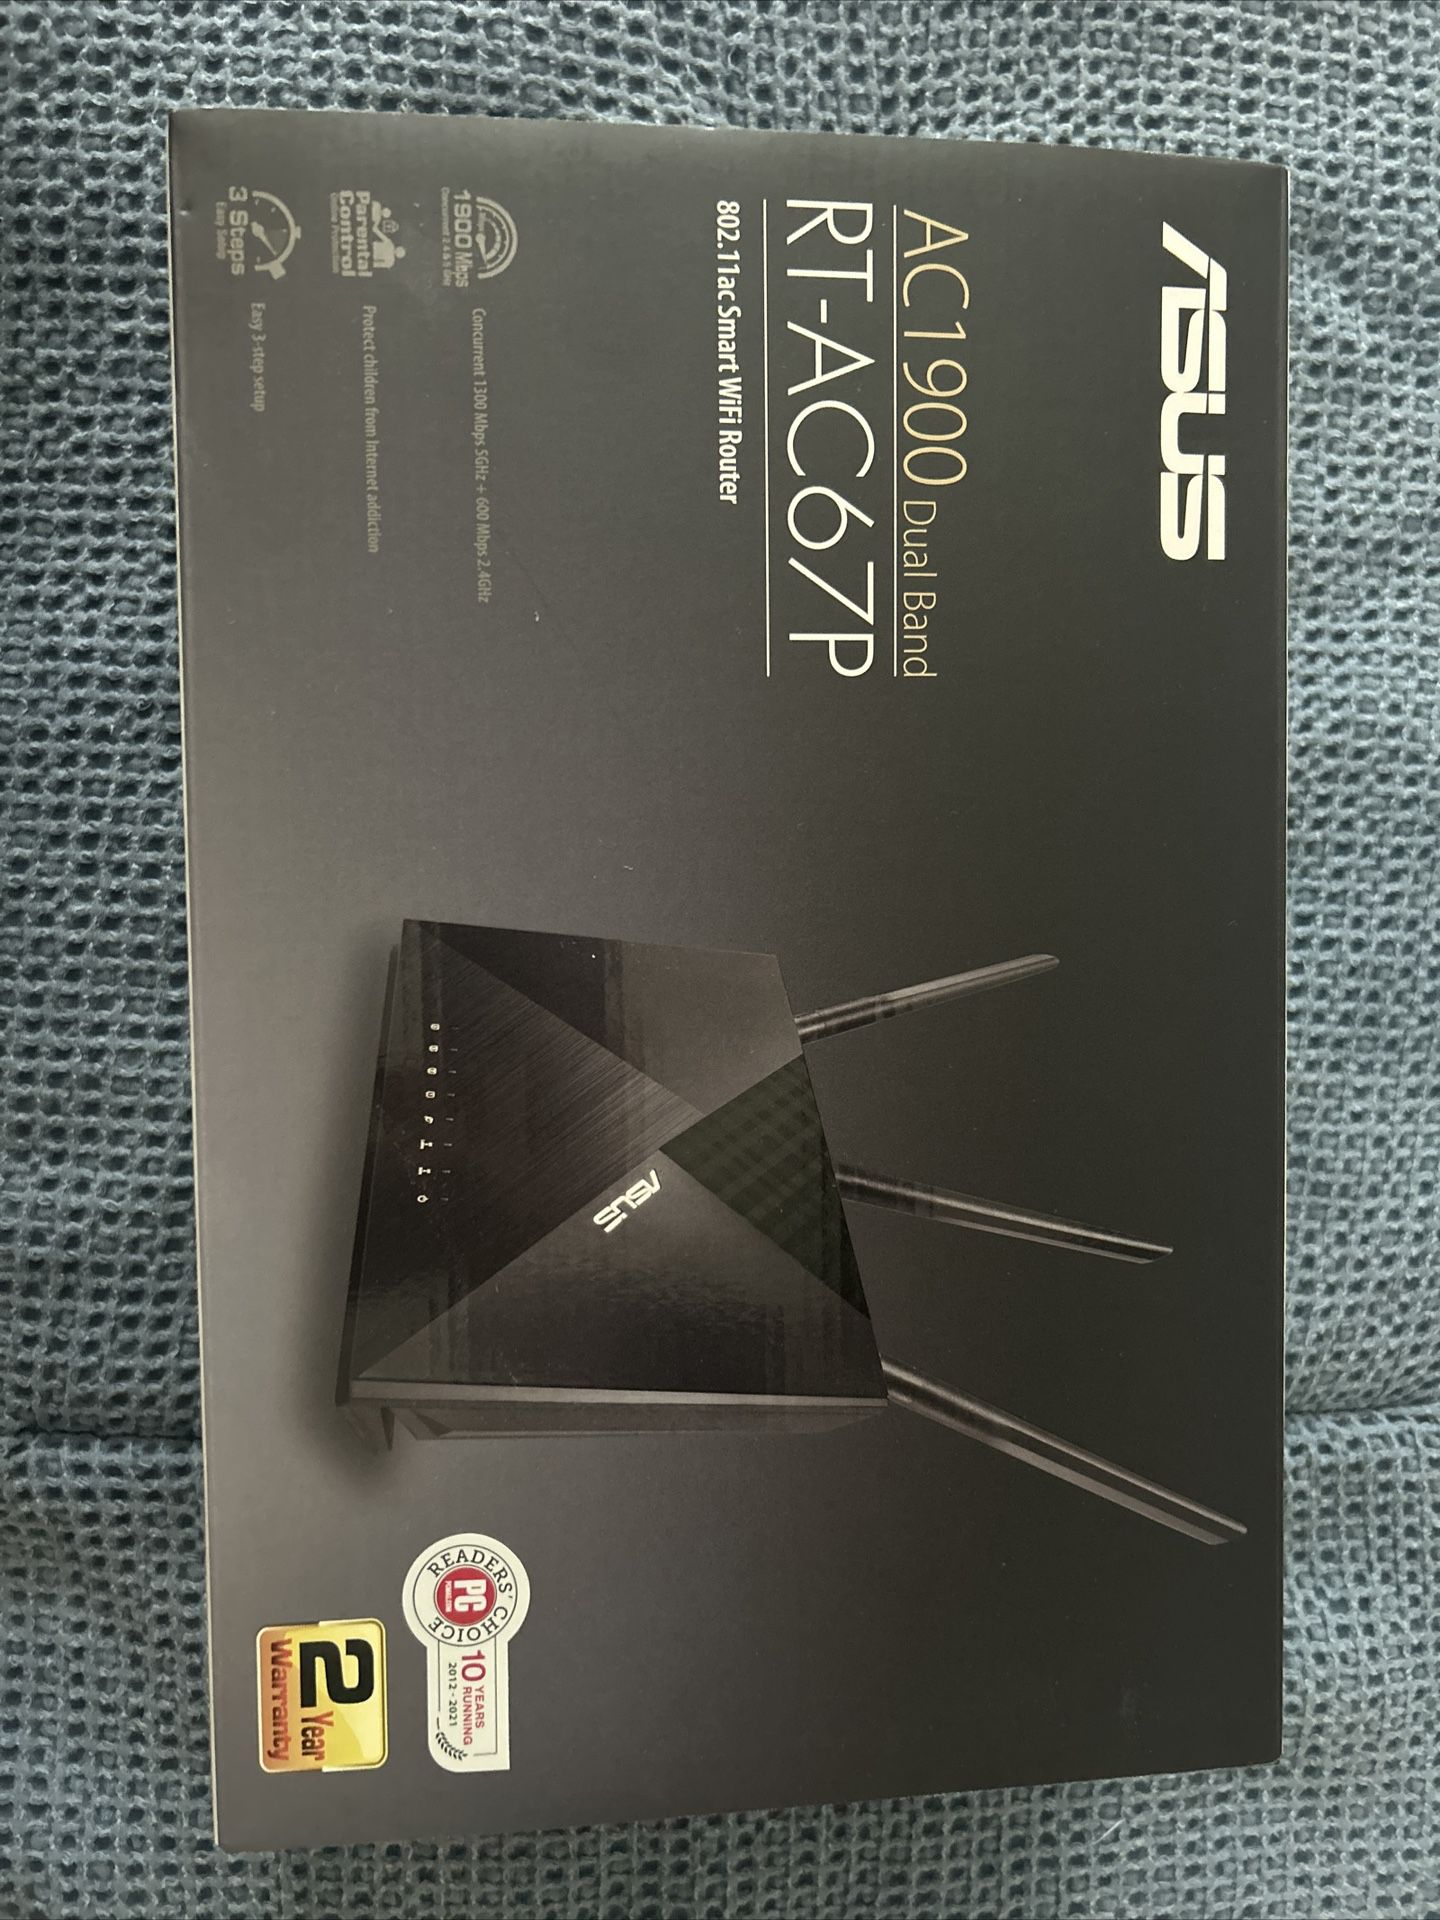 Asus AC1900 Dual Band Router up To 1300 Mbps